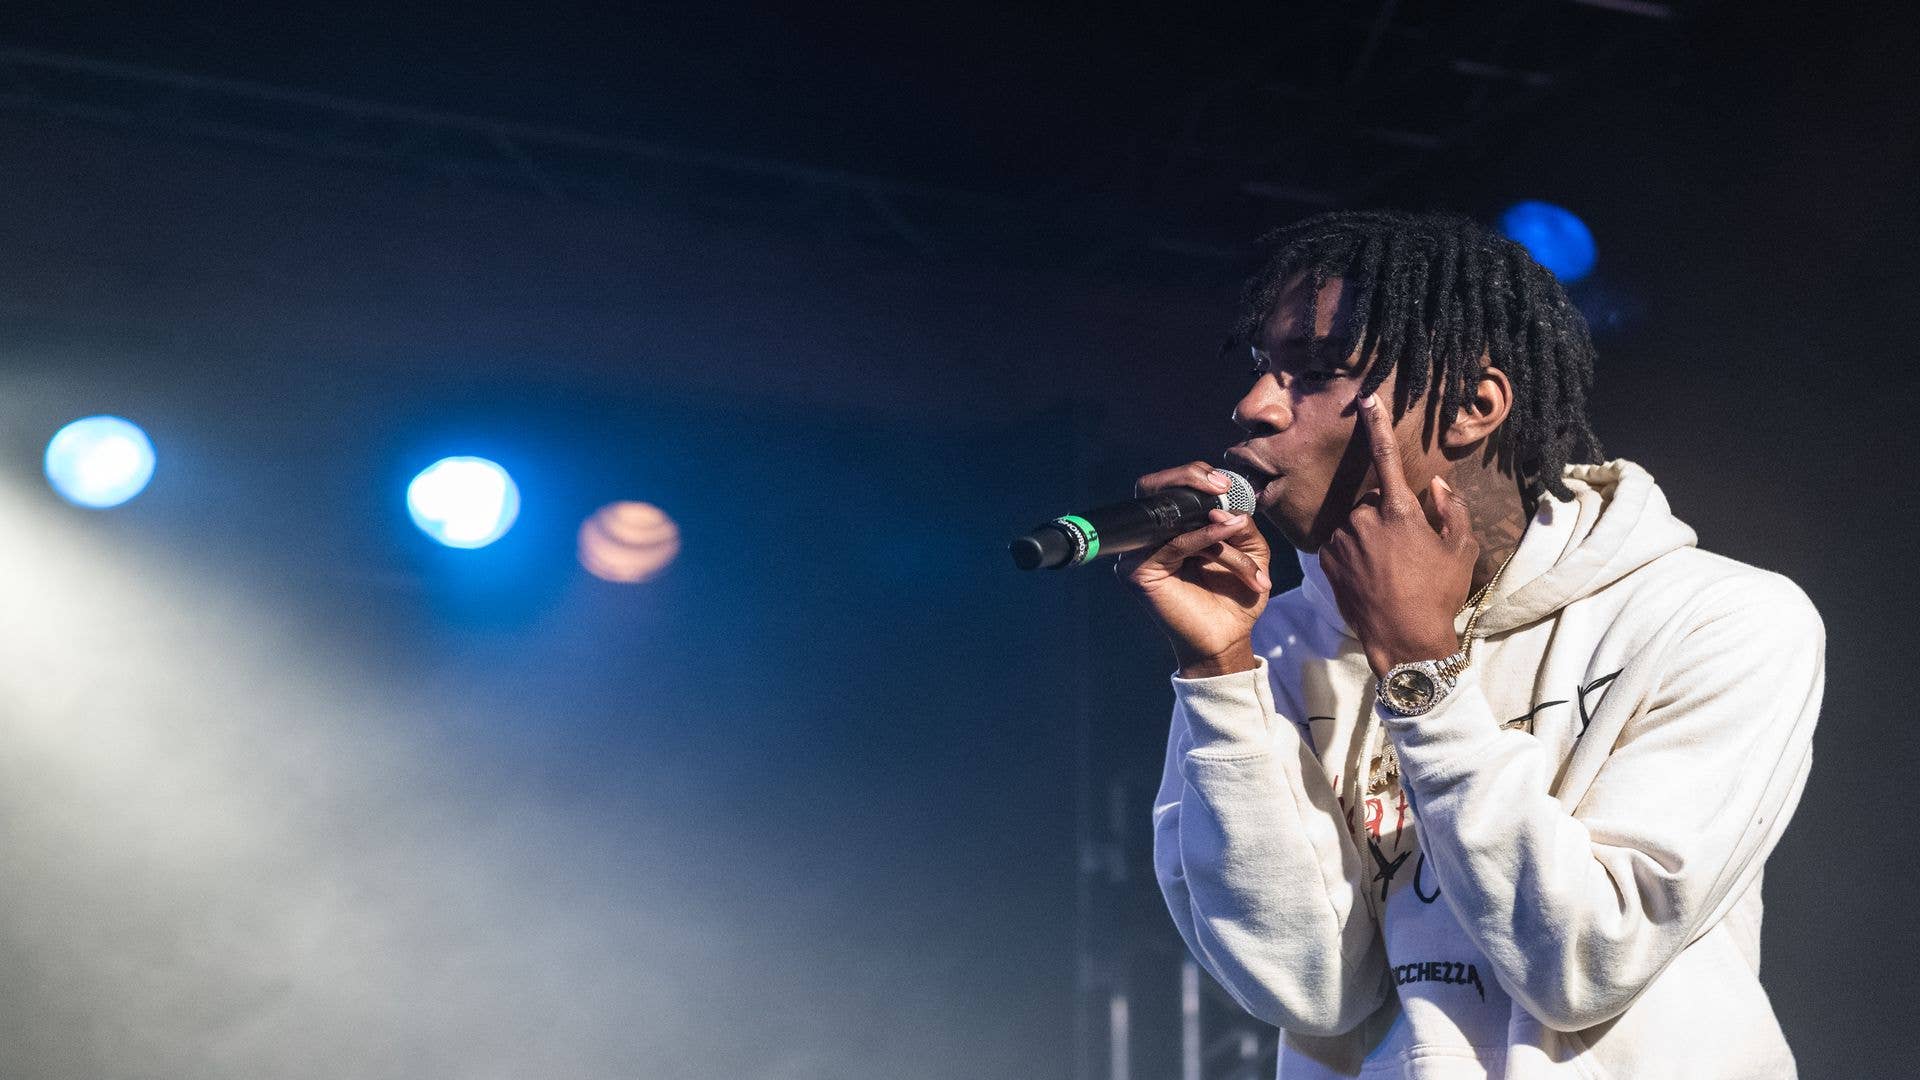 Polo G Scores First No. 1 on Billboard 200 With 'Hall of Fame' Album